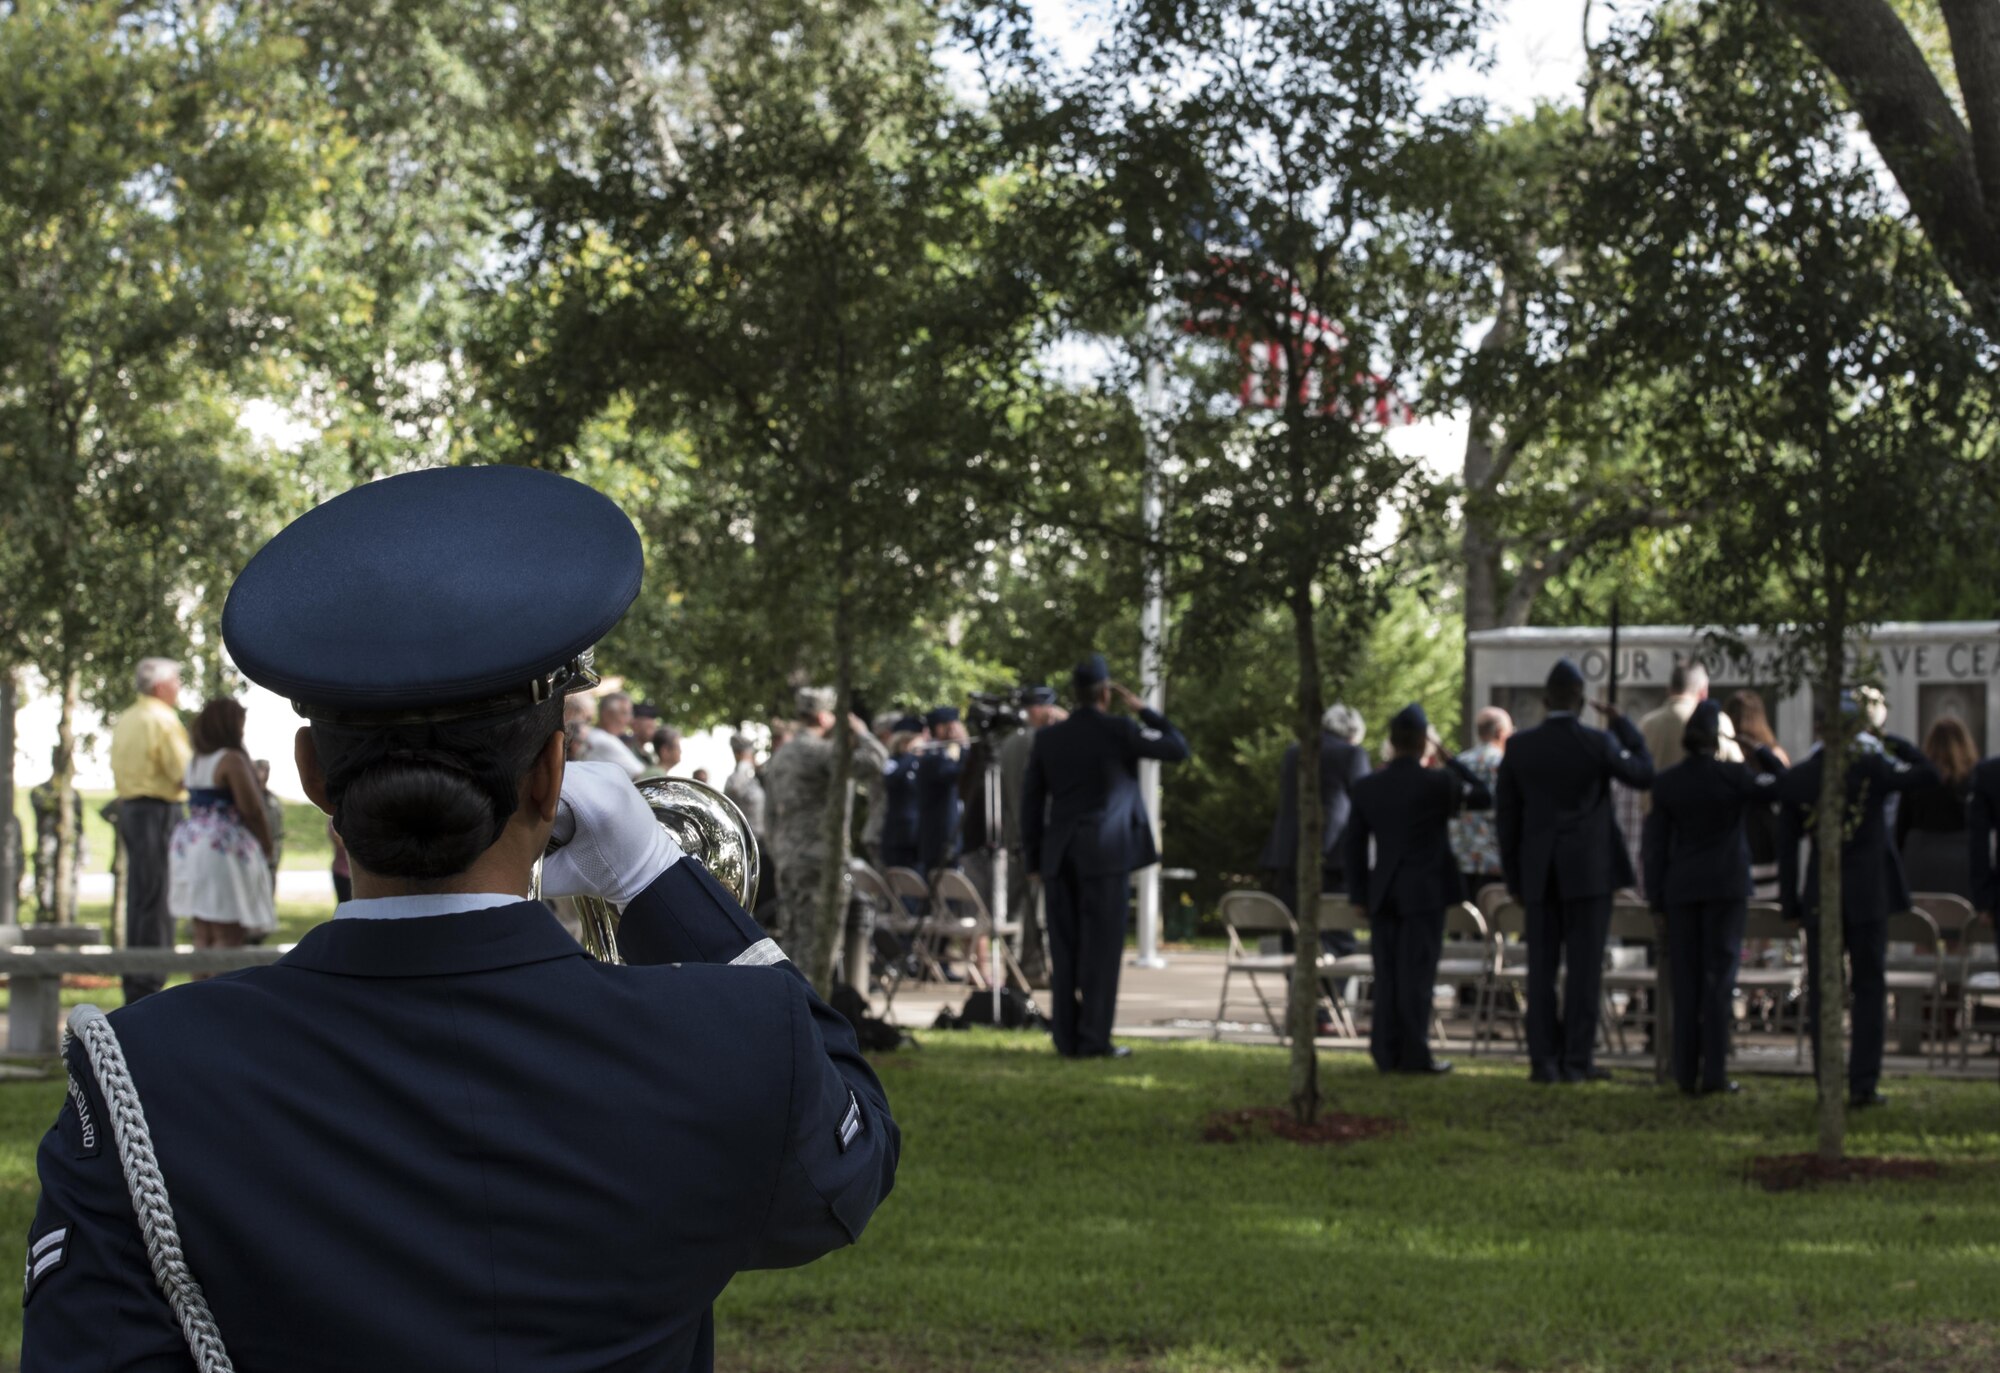 A member of the base Honor Guard plays Taps during the Khobar Towers 21st Anniversary Wreath Laying Ceremony June 23, 2017, at Eglin Air Force Base, Florida. On June 25, 1996, a bomb was detonated near the Khobar Towers housing complex in Dhahran, Saudi Arabia. Nineteen Airmen were killed and more than 400 U.S. and international military and civilians were injured in the blast.  Of the 19 killed, 12 were Nomads. The Nomad Each year the 33 FW holds a ceremony in remembrance of that day. (U.S. Air Force photo by Staff Sgt. Peter Thompson)